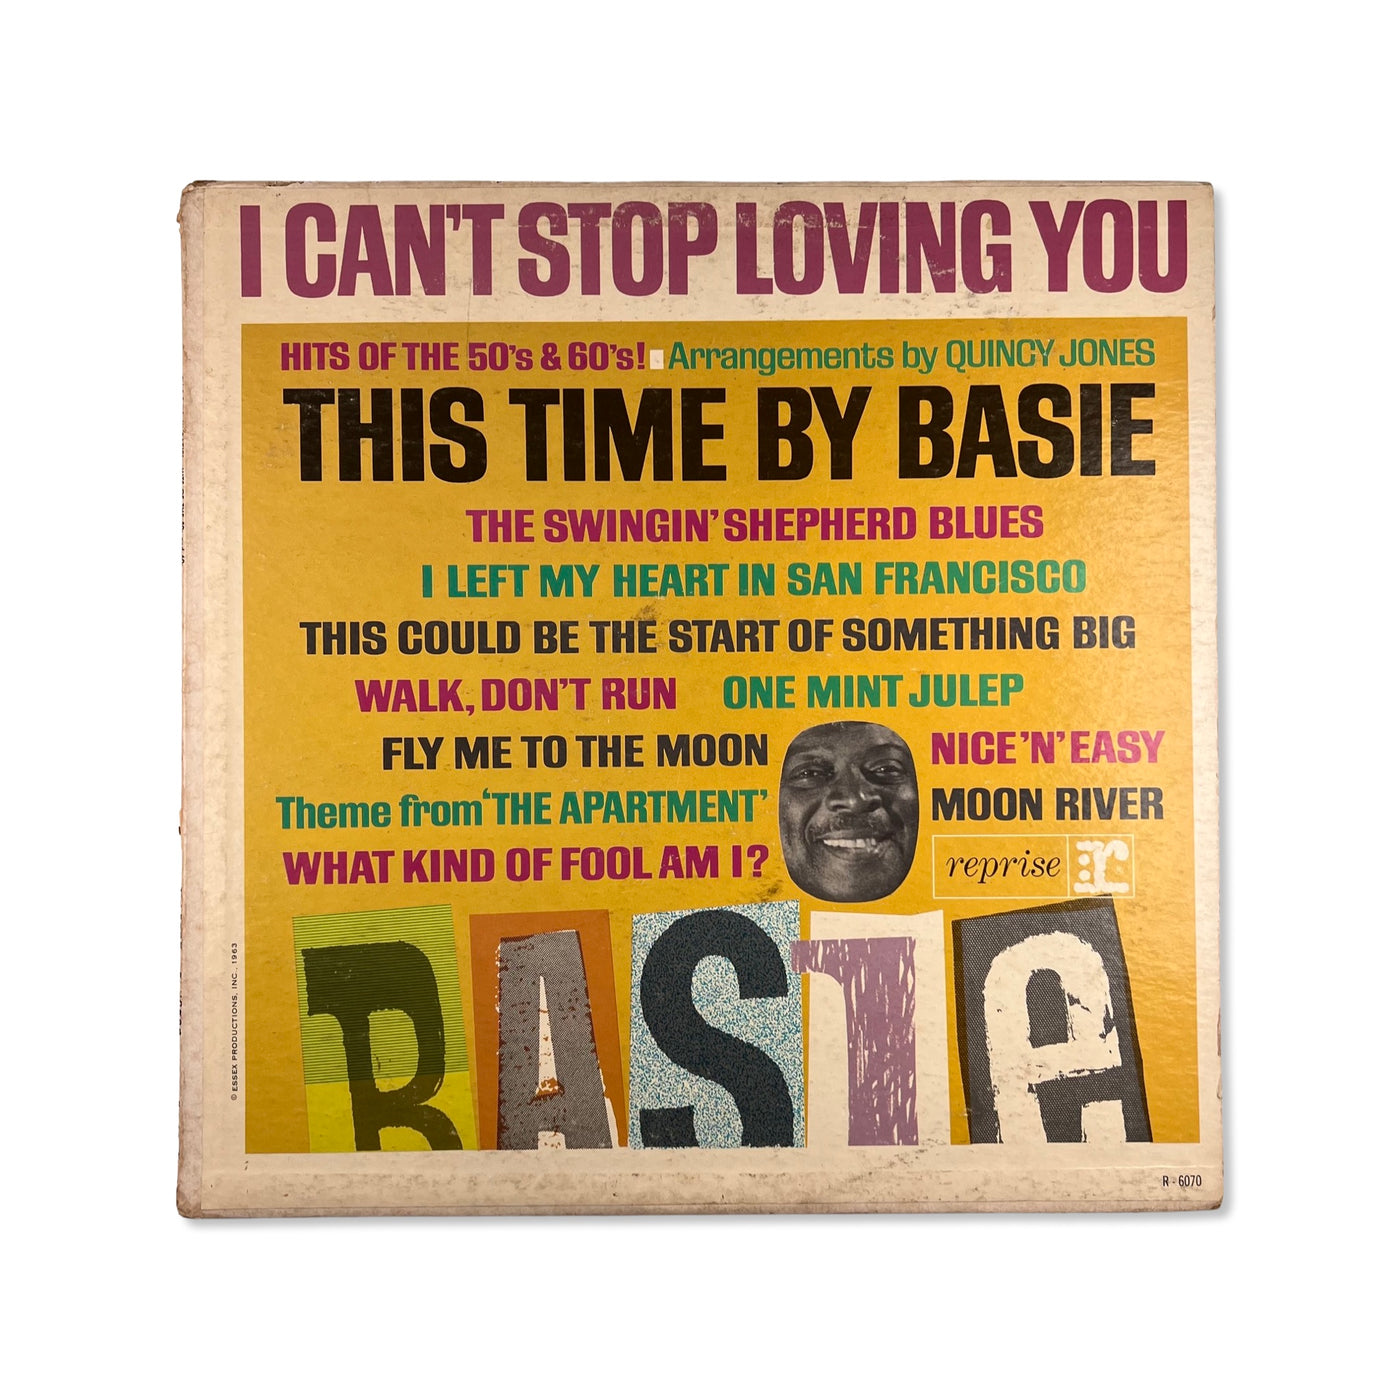 Count Basie – I Can't Stop Loving You